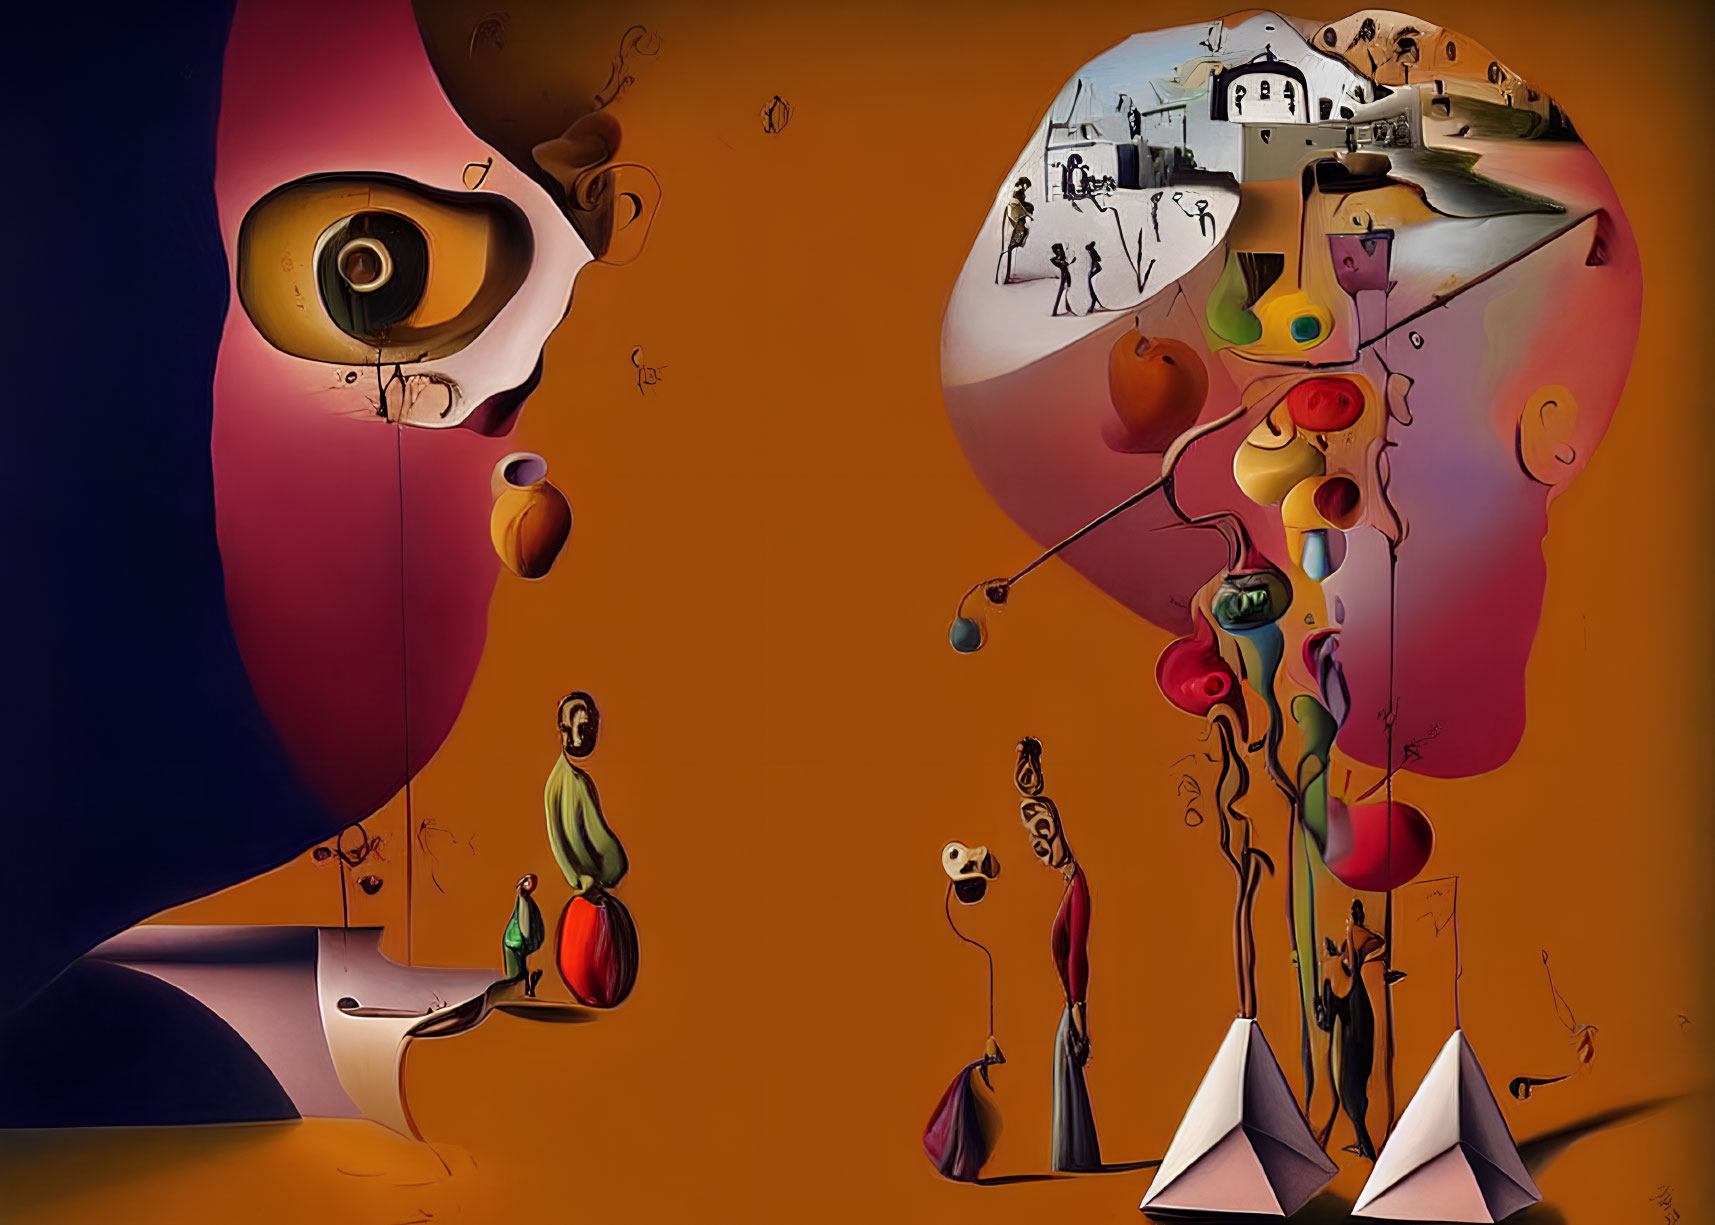 Abstract surreal artwork: Stylized faces, landscapes, figures, and shapes in warm colors